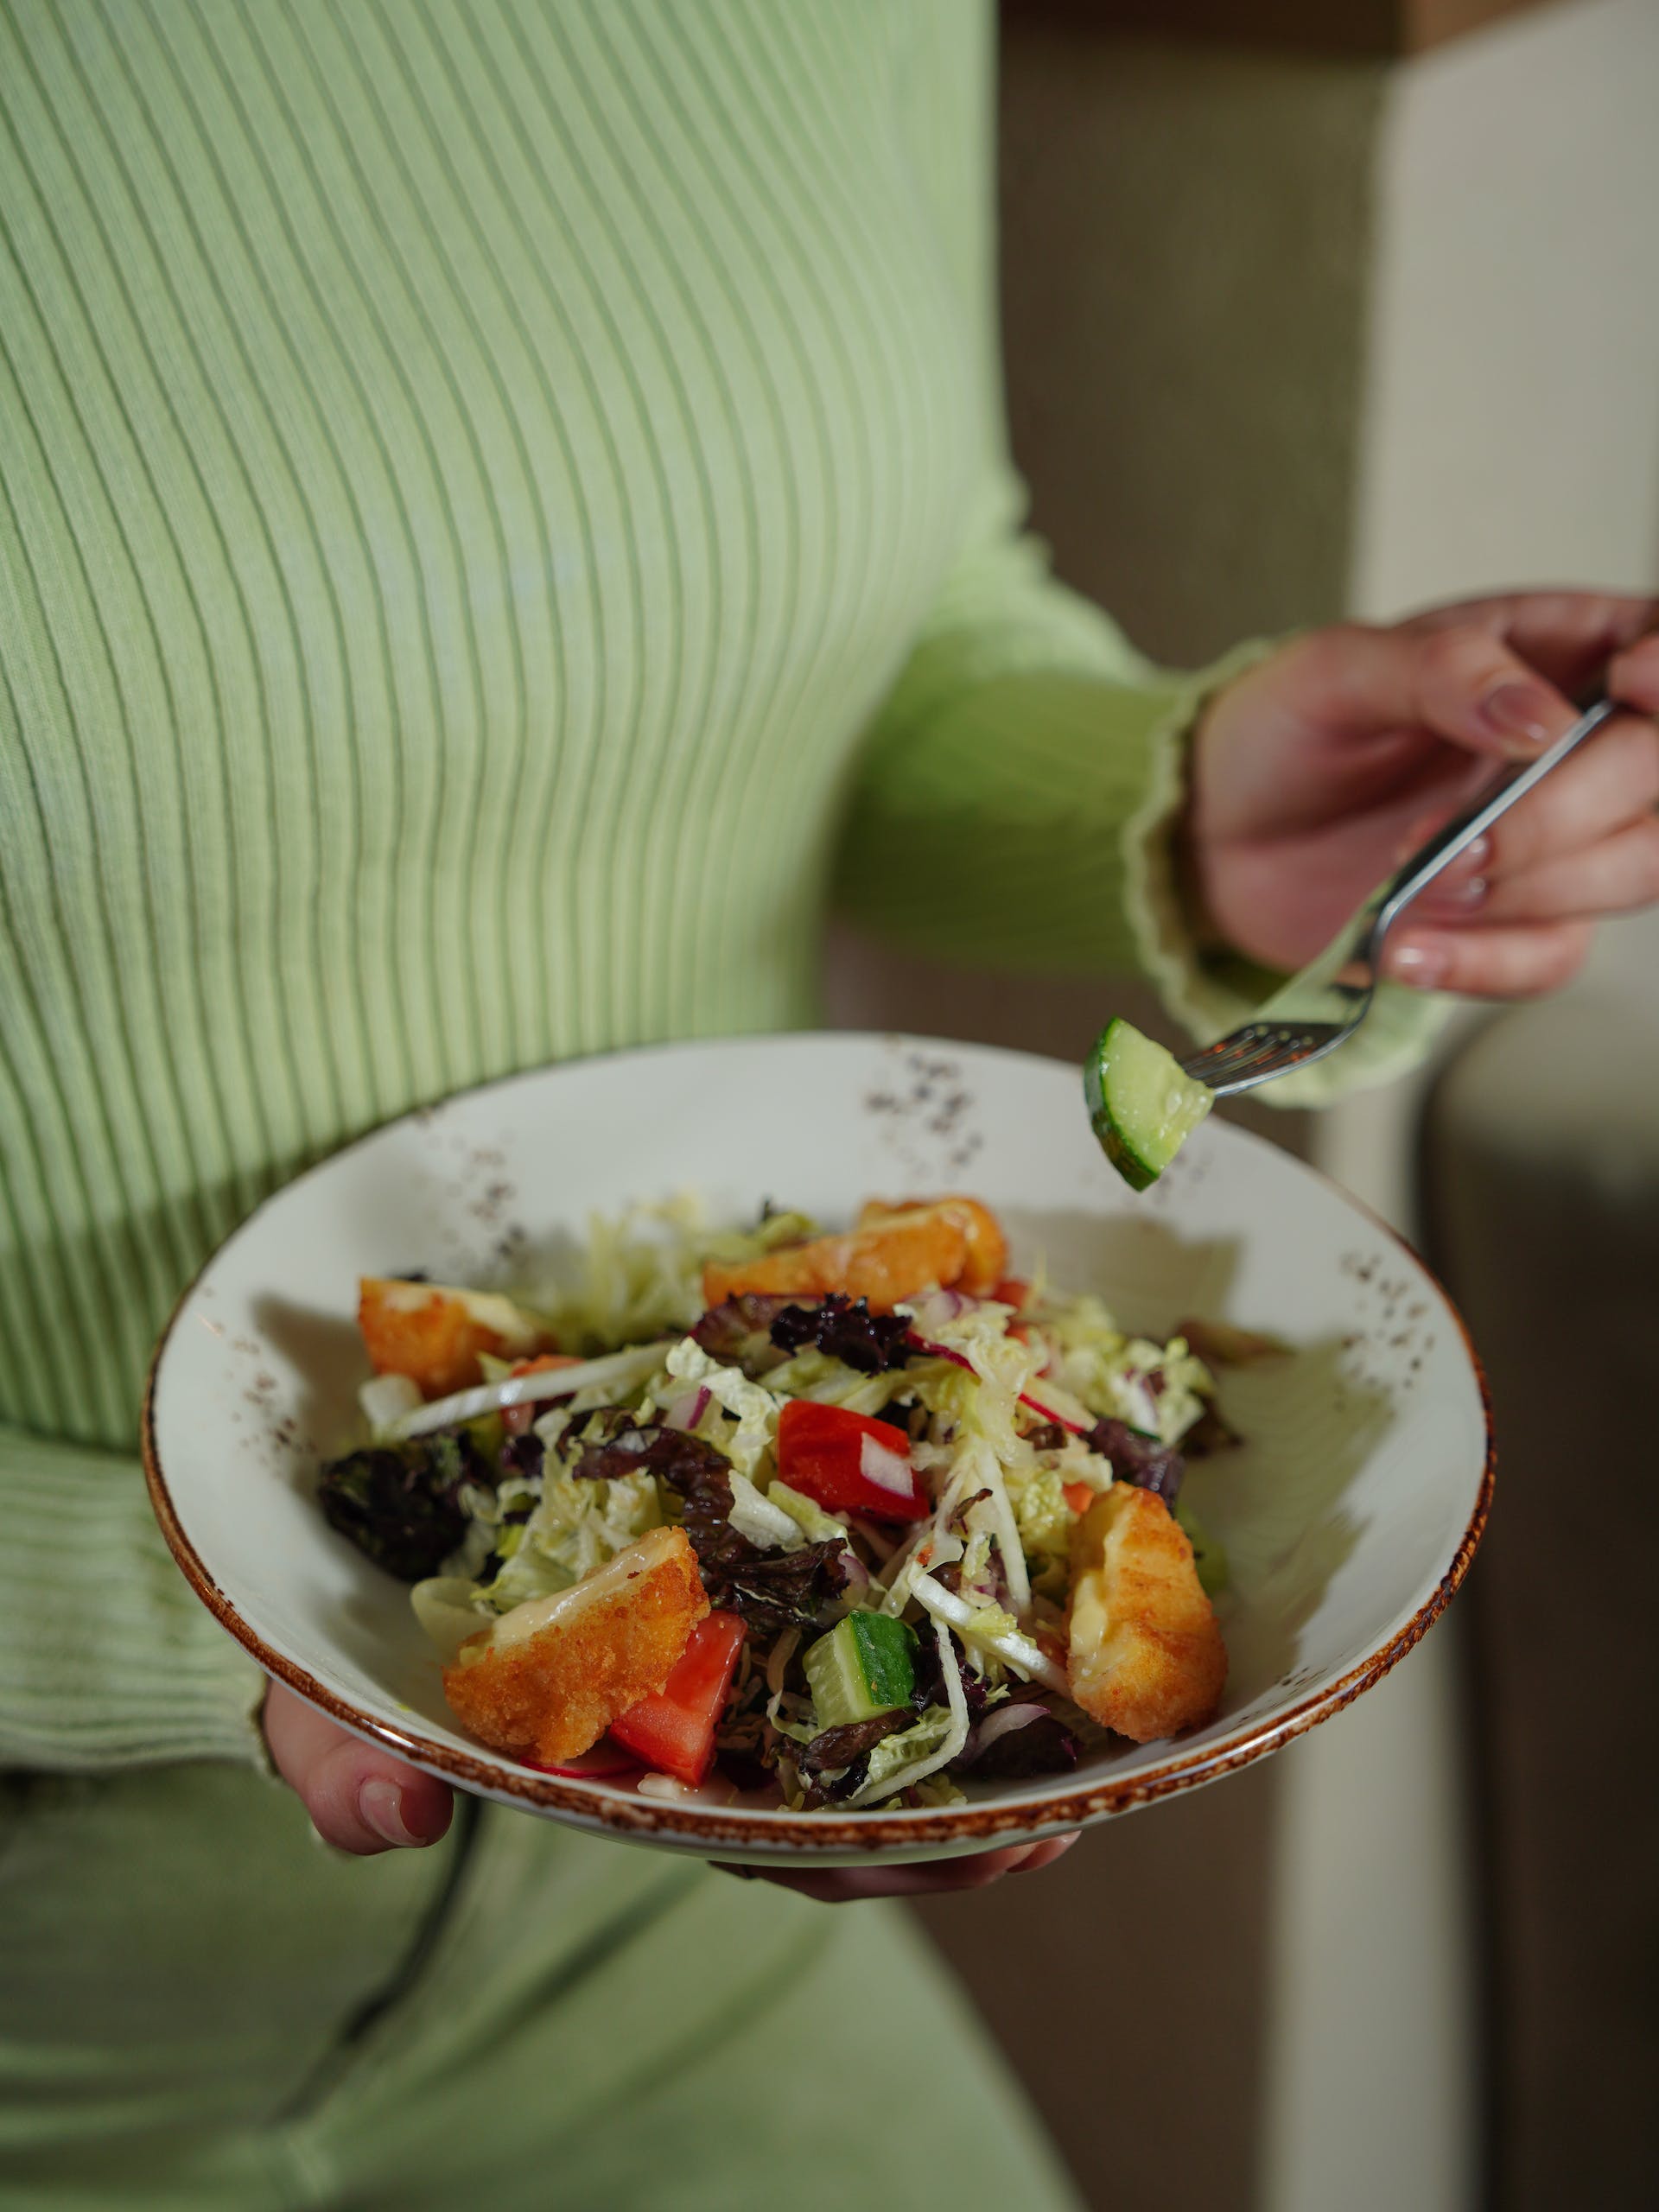 Close up of a woman holding a salad bowl | Source: Pexels